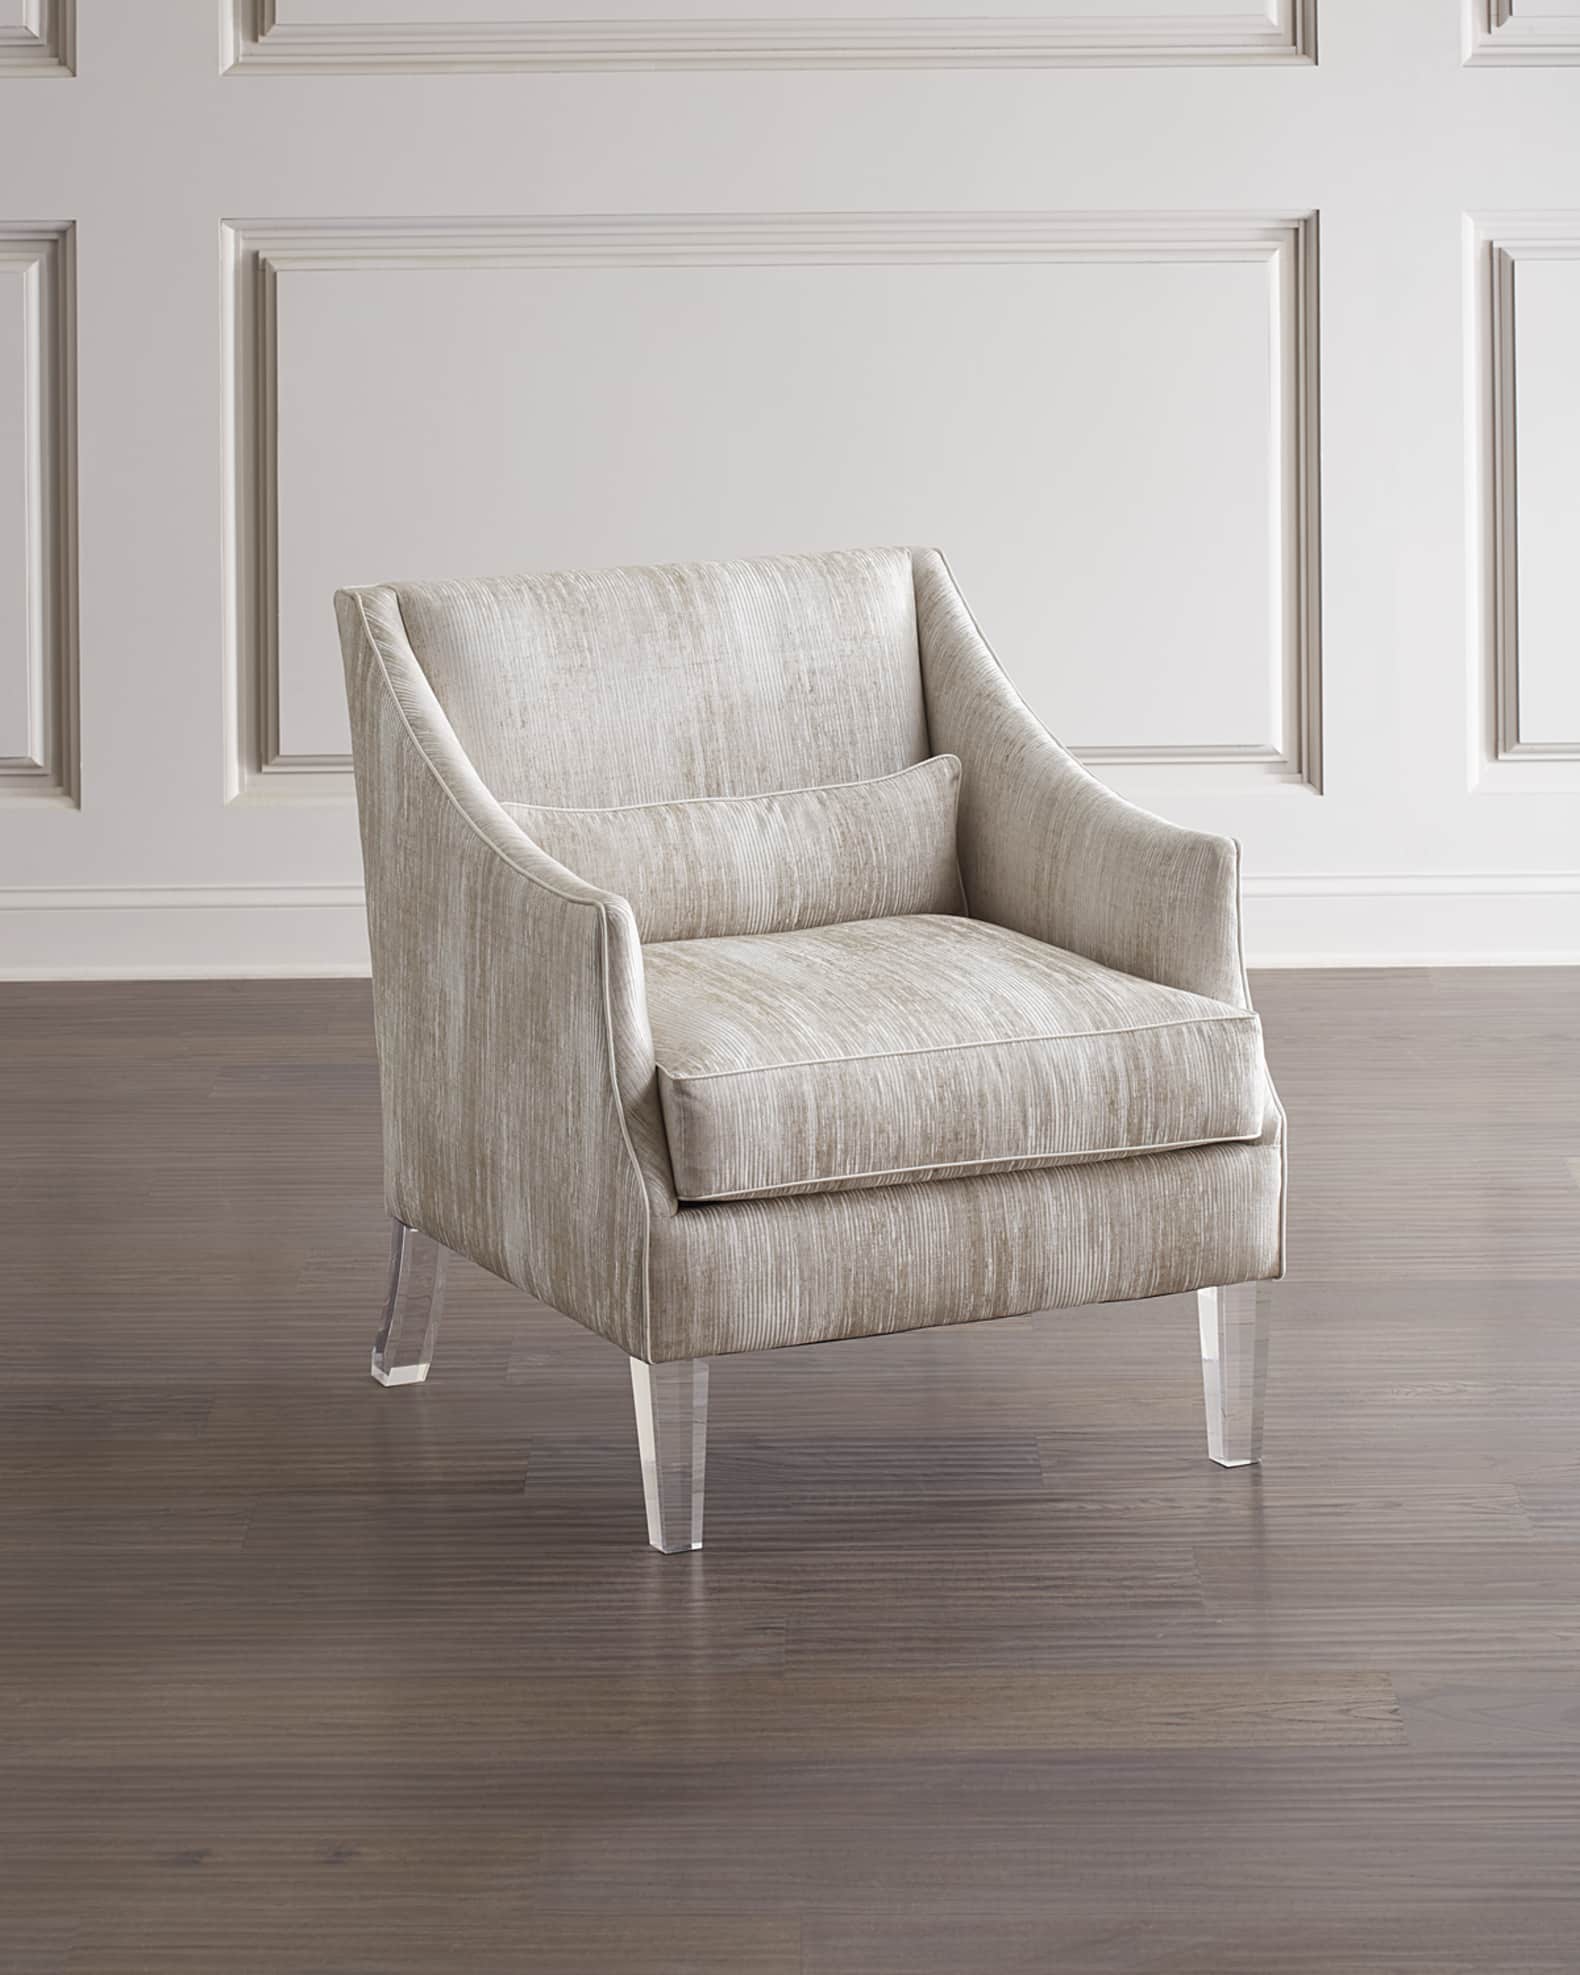 John-Richard Collection Mid-Sized Occasional Arm Chair